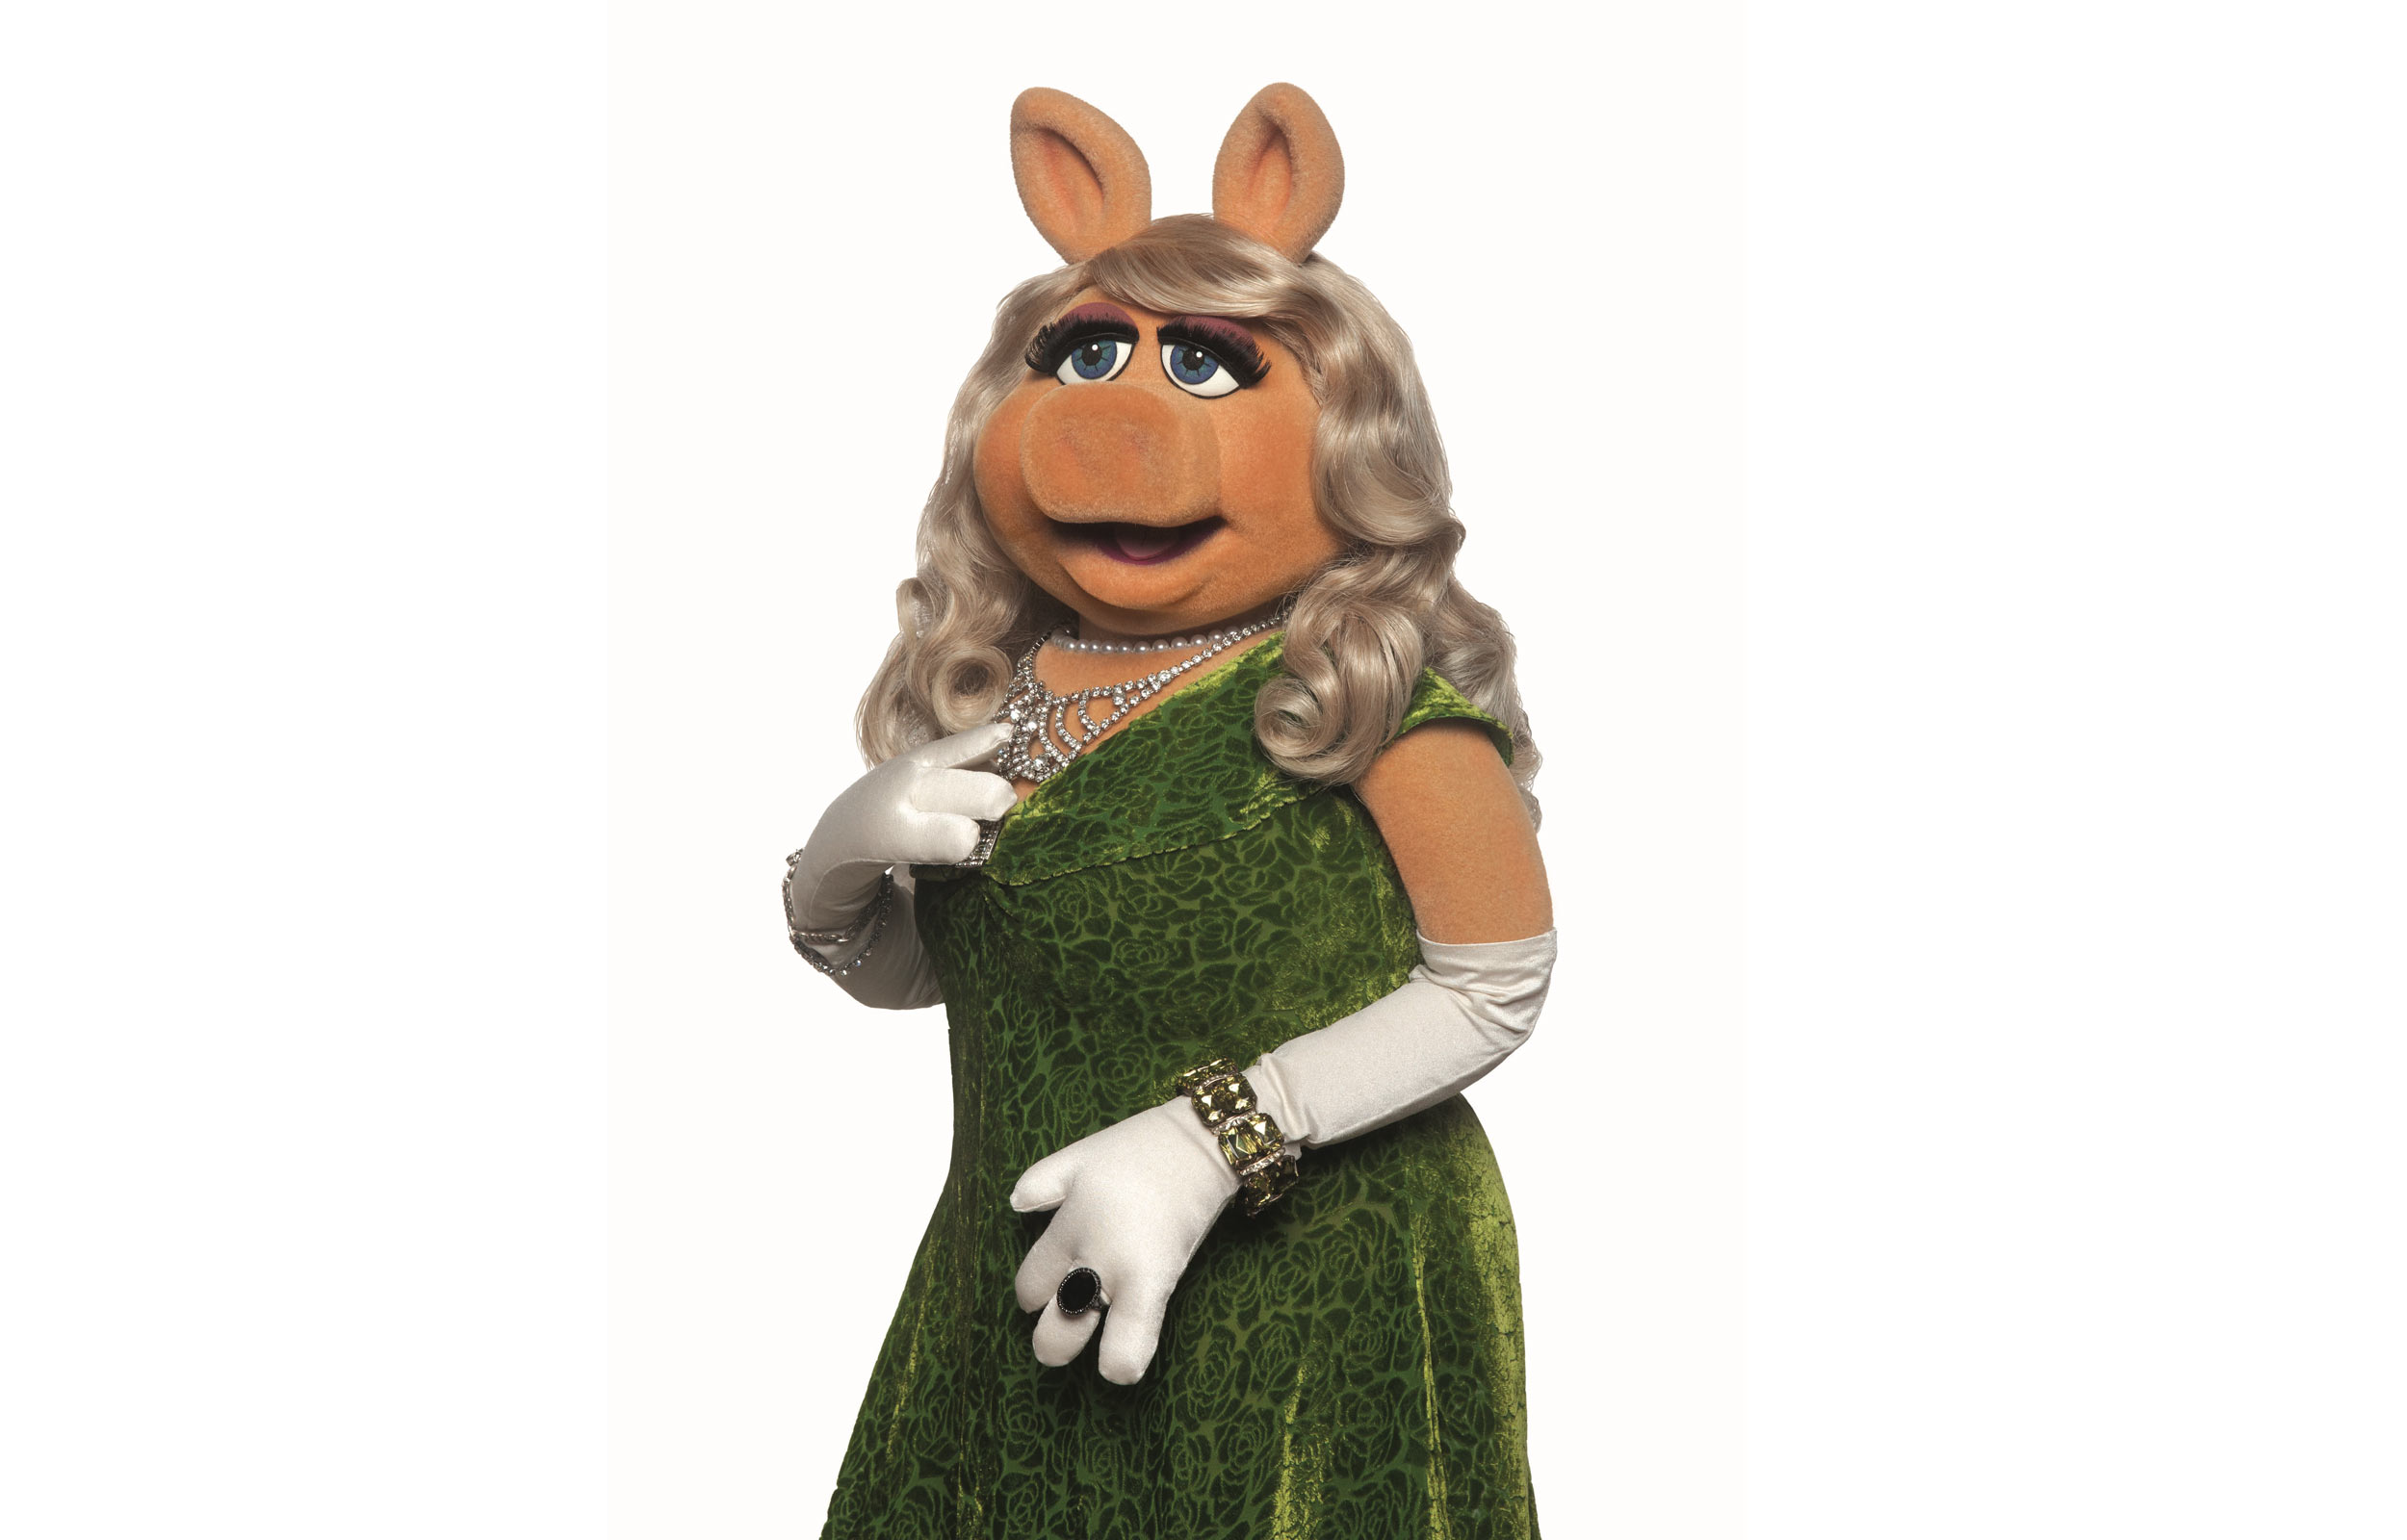 Miss Piggy reveals the songs that inspire her